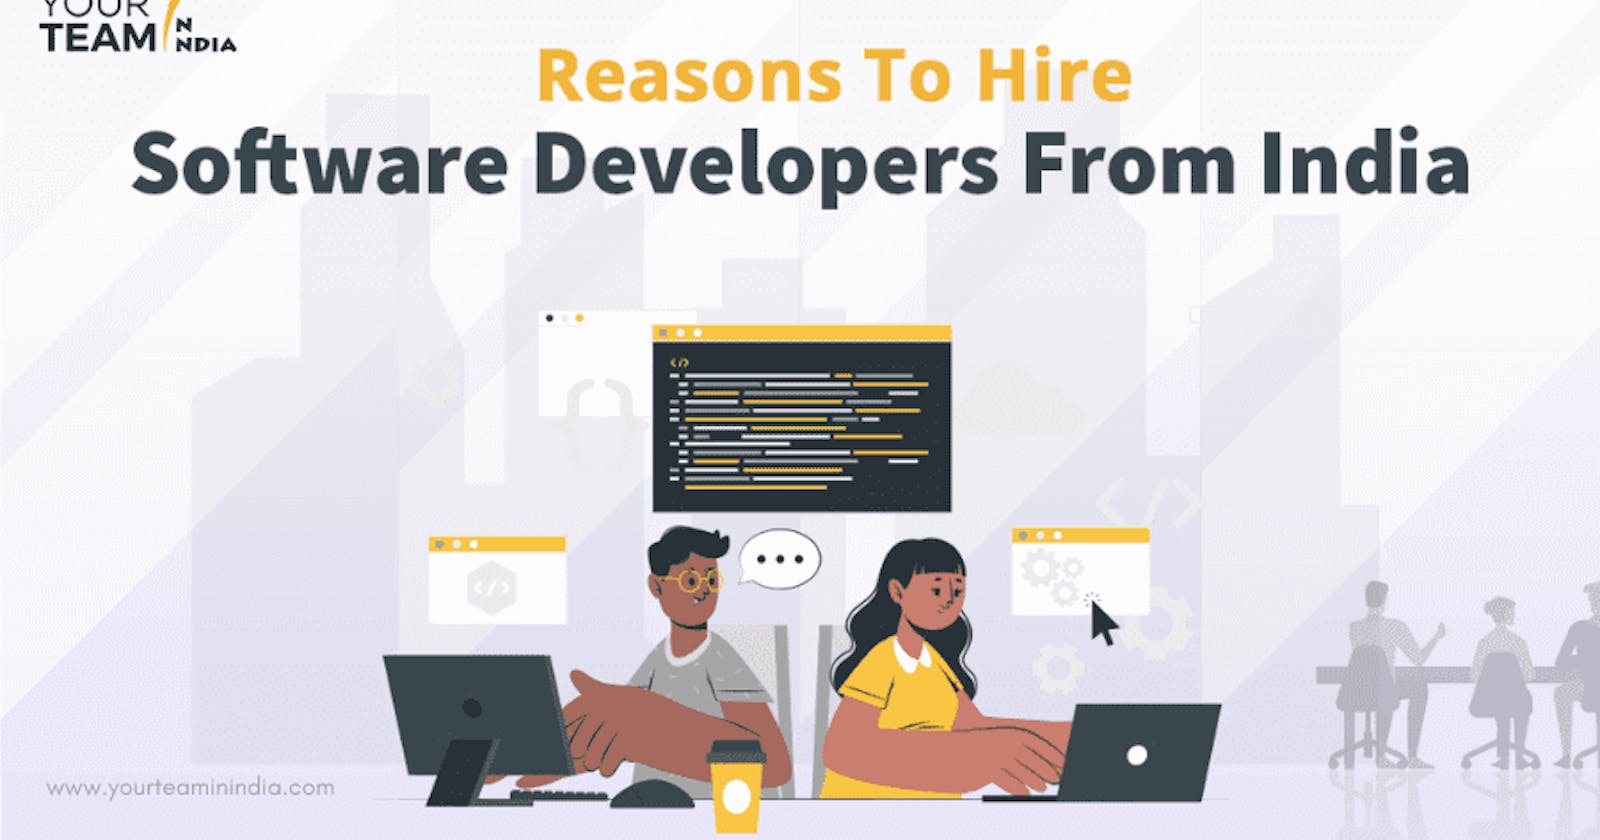 11 Reasons To Hire Software Developers From India